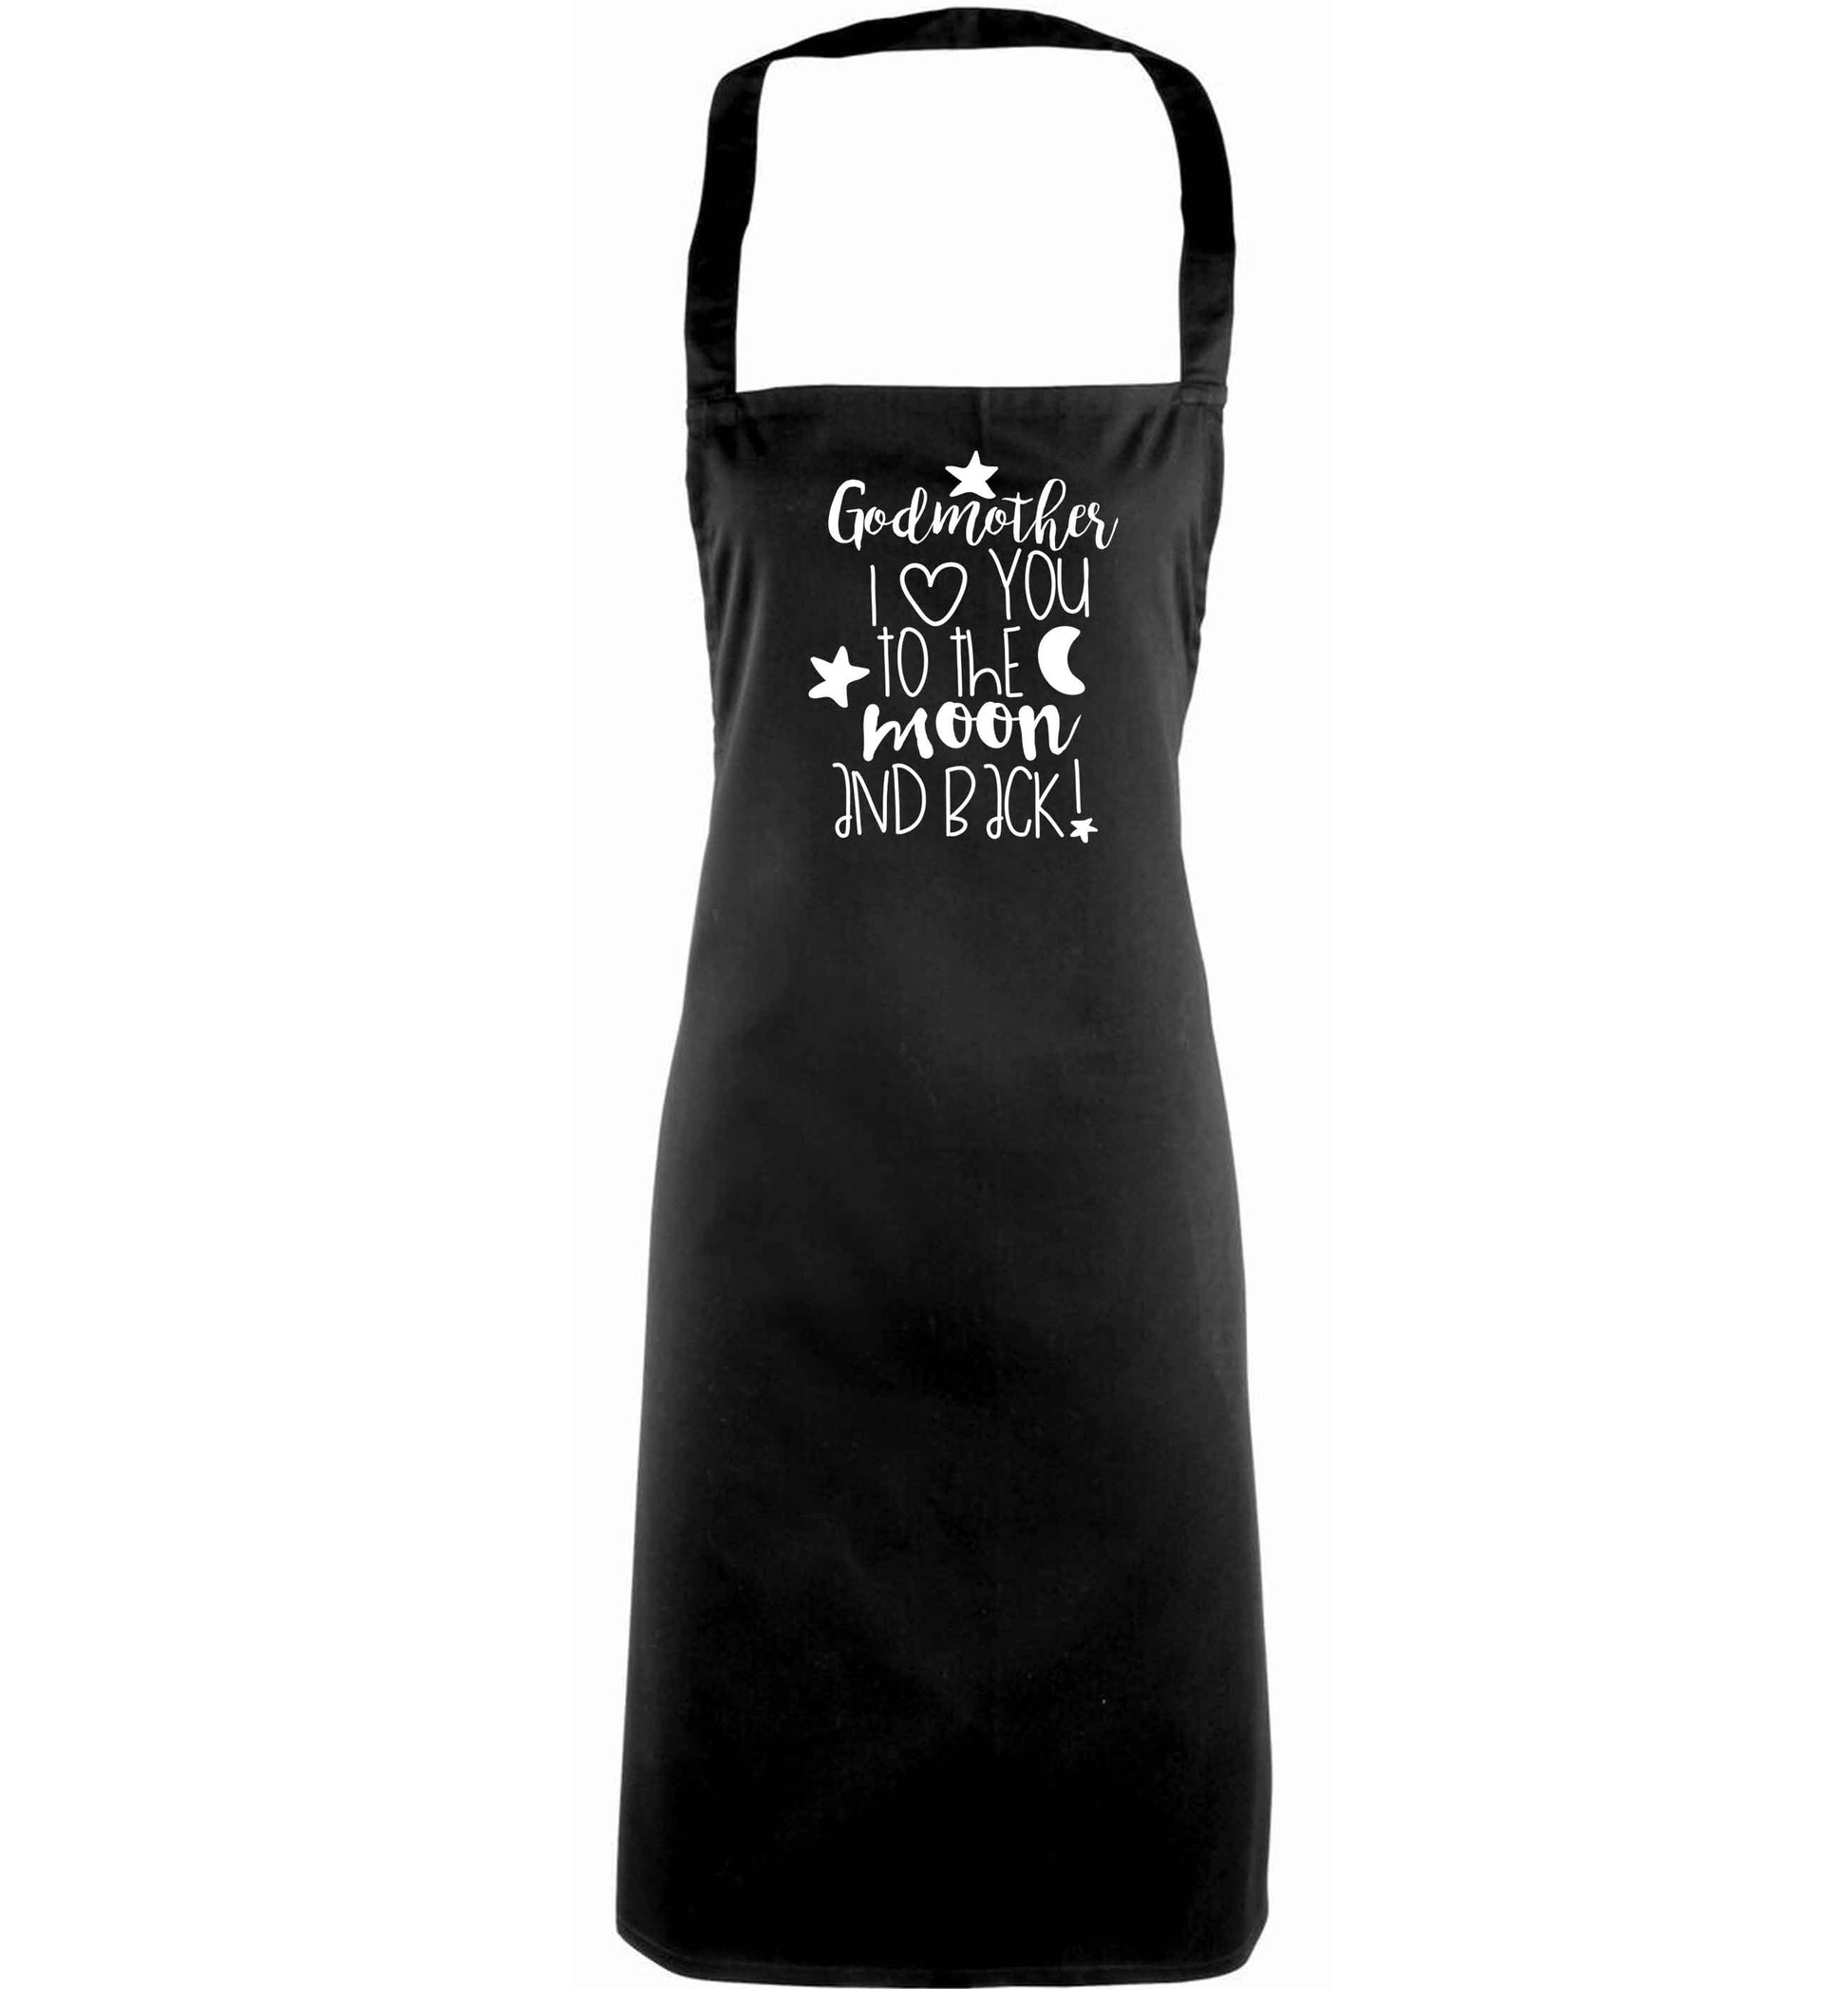 Godmother I love you to the moon and back adults black apron